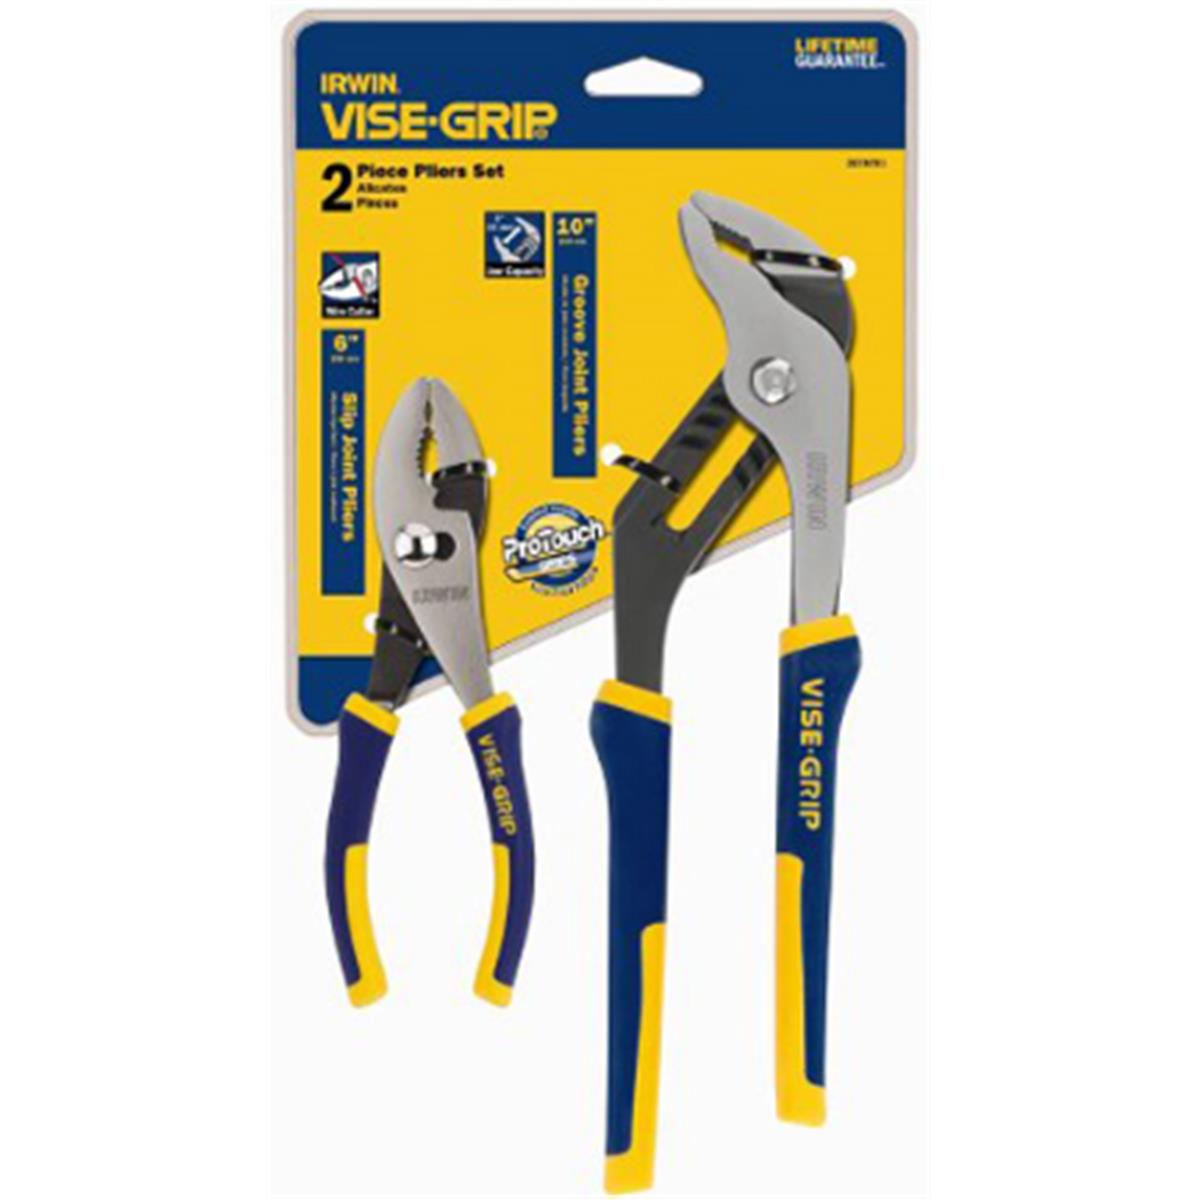 2078701 Pliers Set With 6 In. Slip Joint & 10 In. Groove Joint